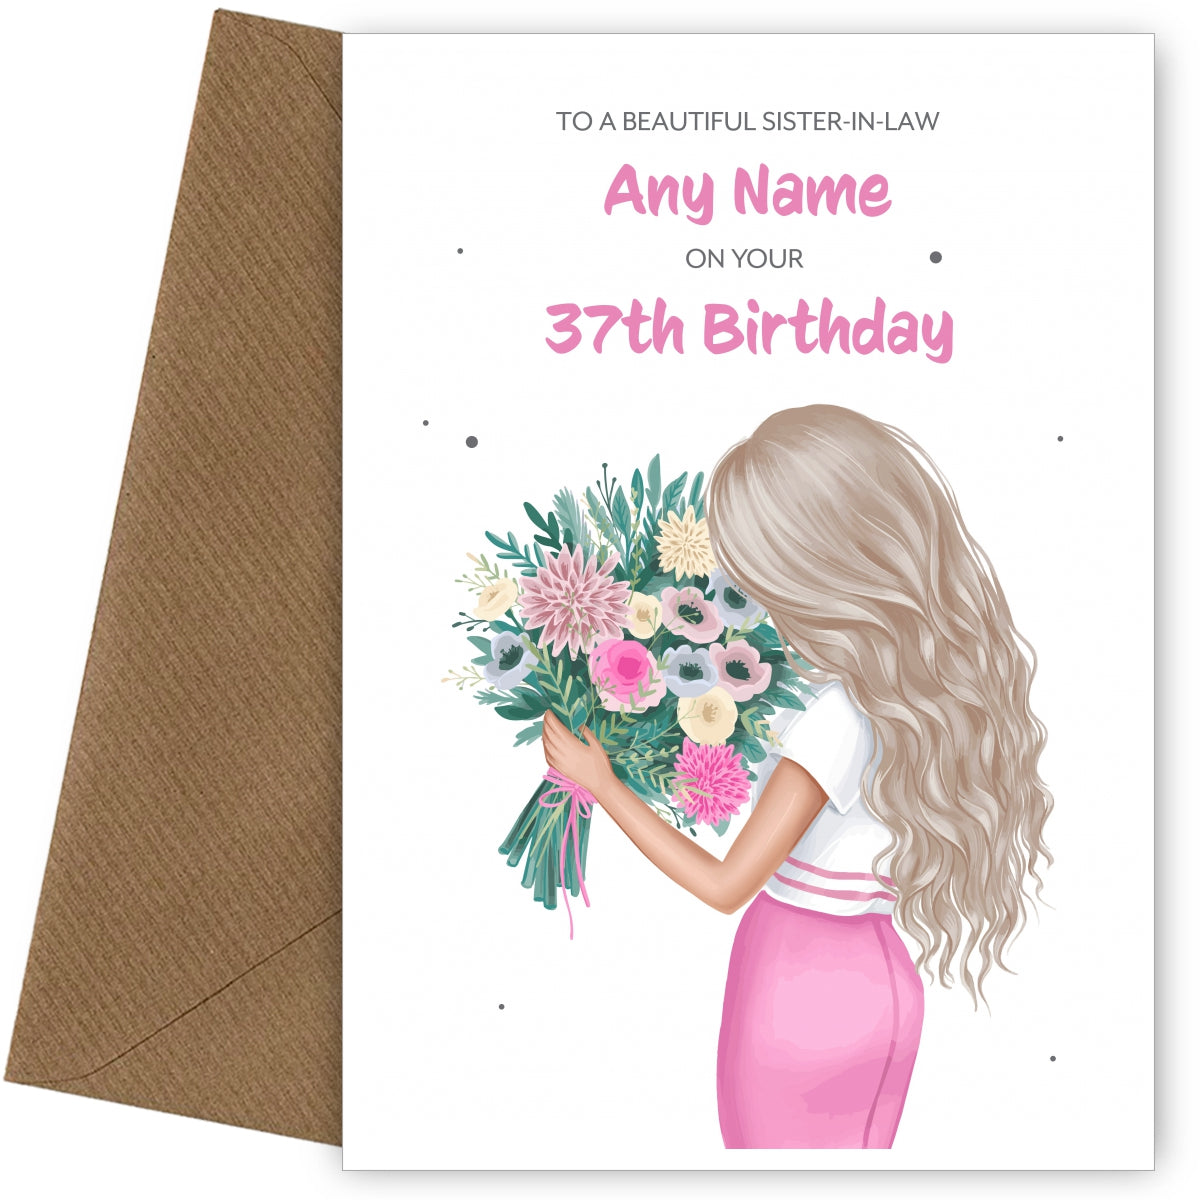 37th Birthday Card for Sister-in-law - Beautiful Blonde